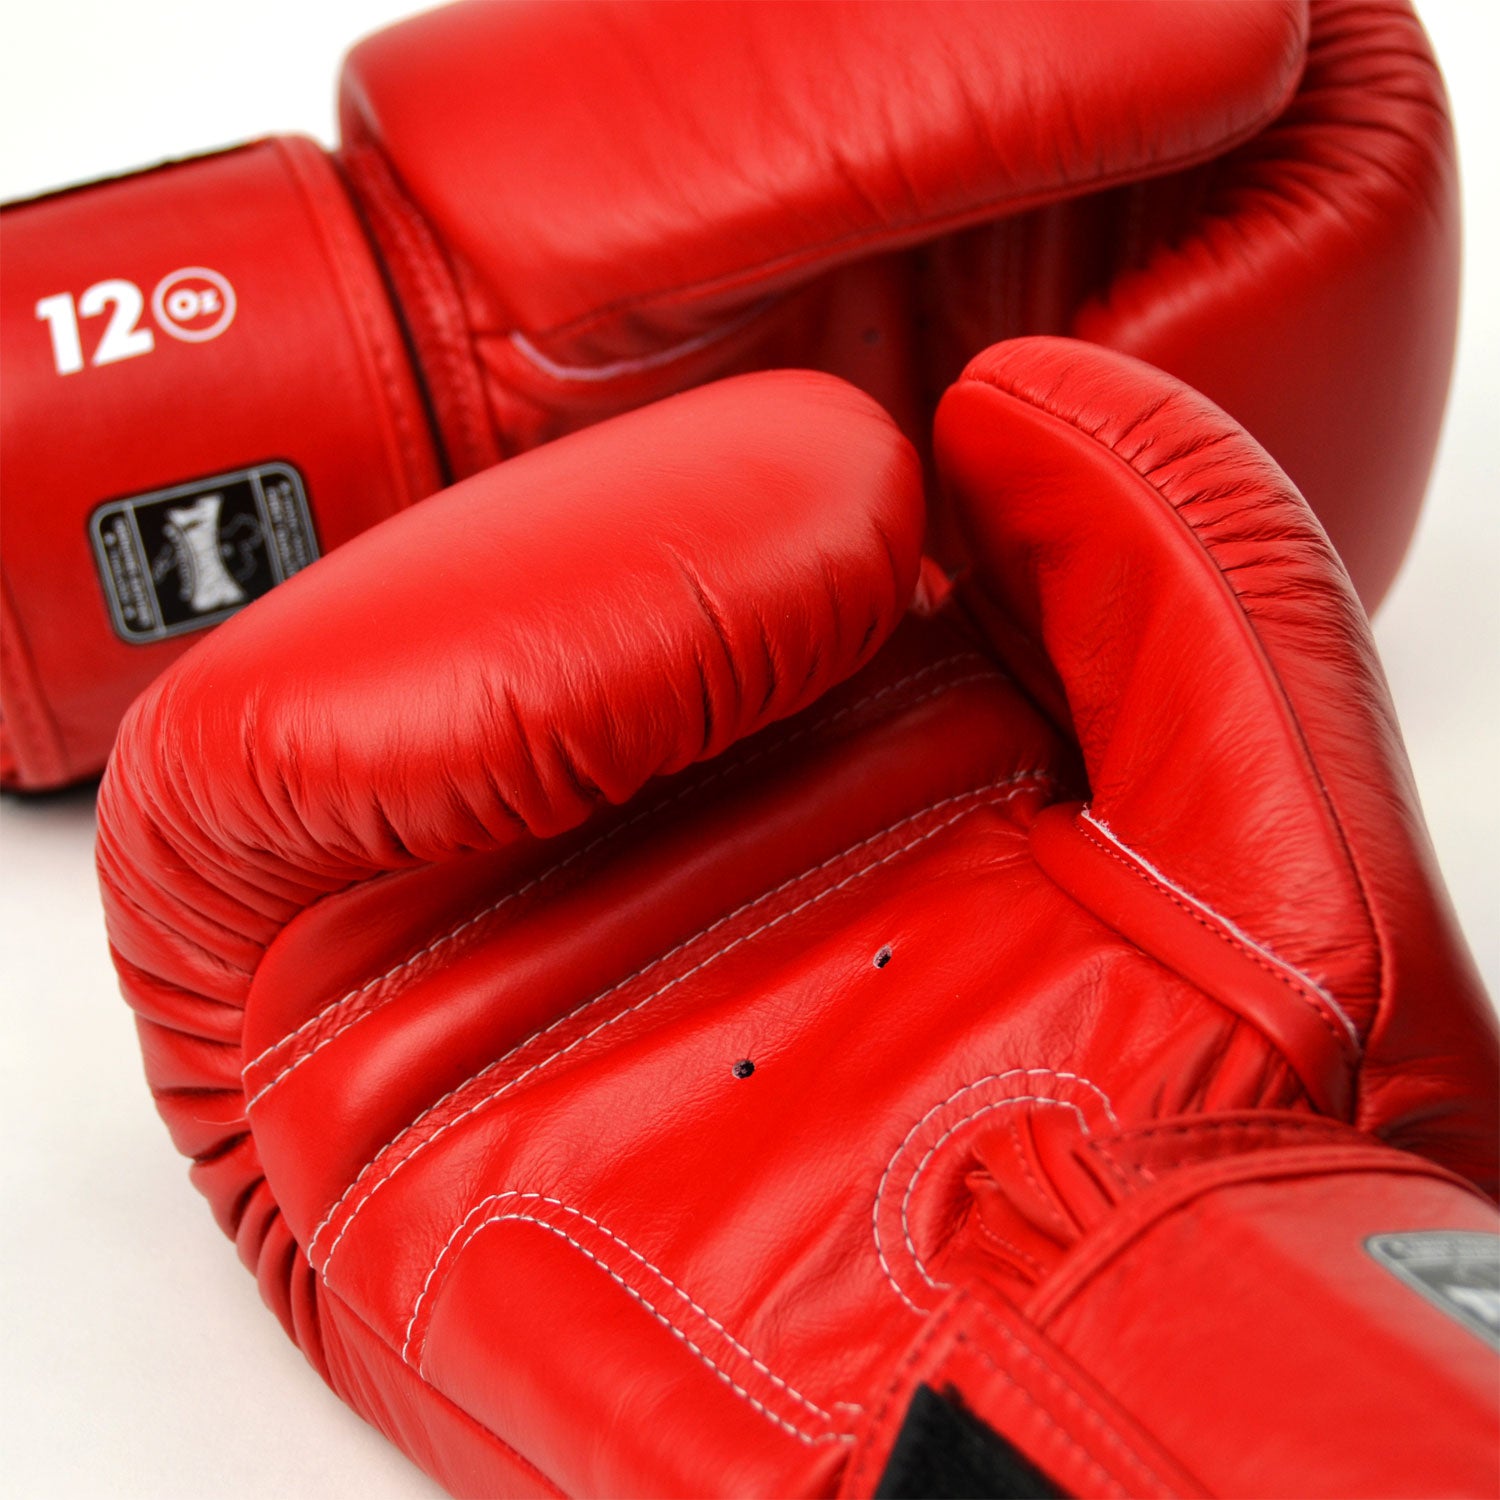 BGVL3 Twins Red Boxing Gloves